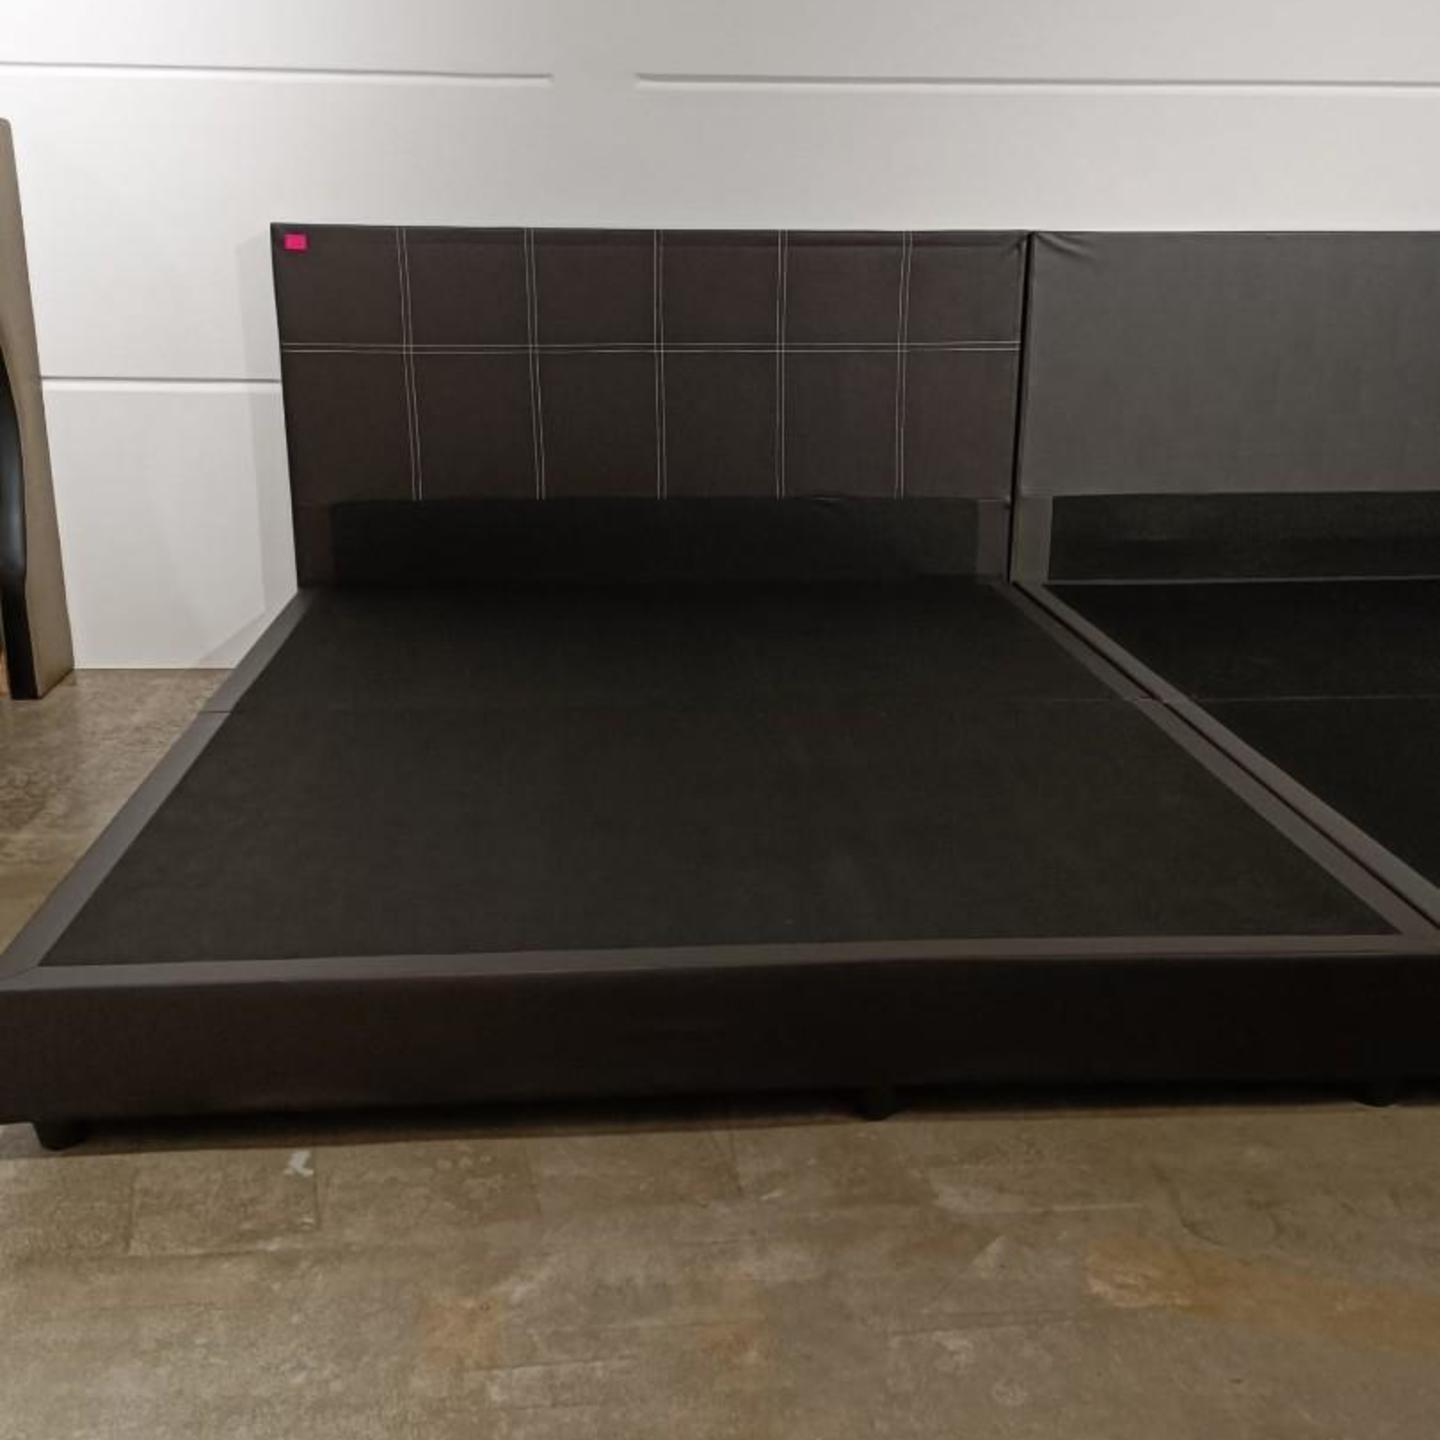 JUDD Queen Bed Frame in COCO BROWN